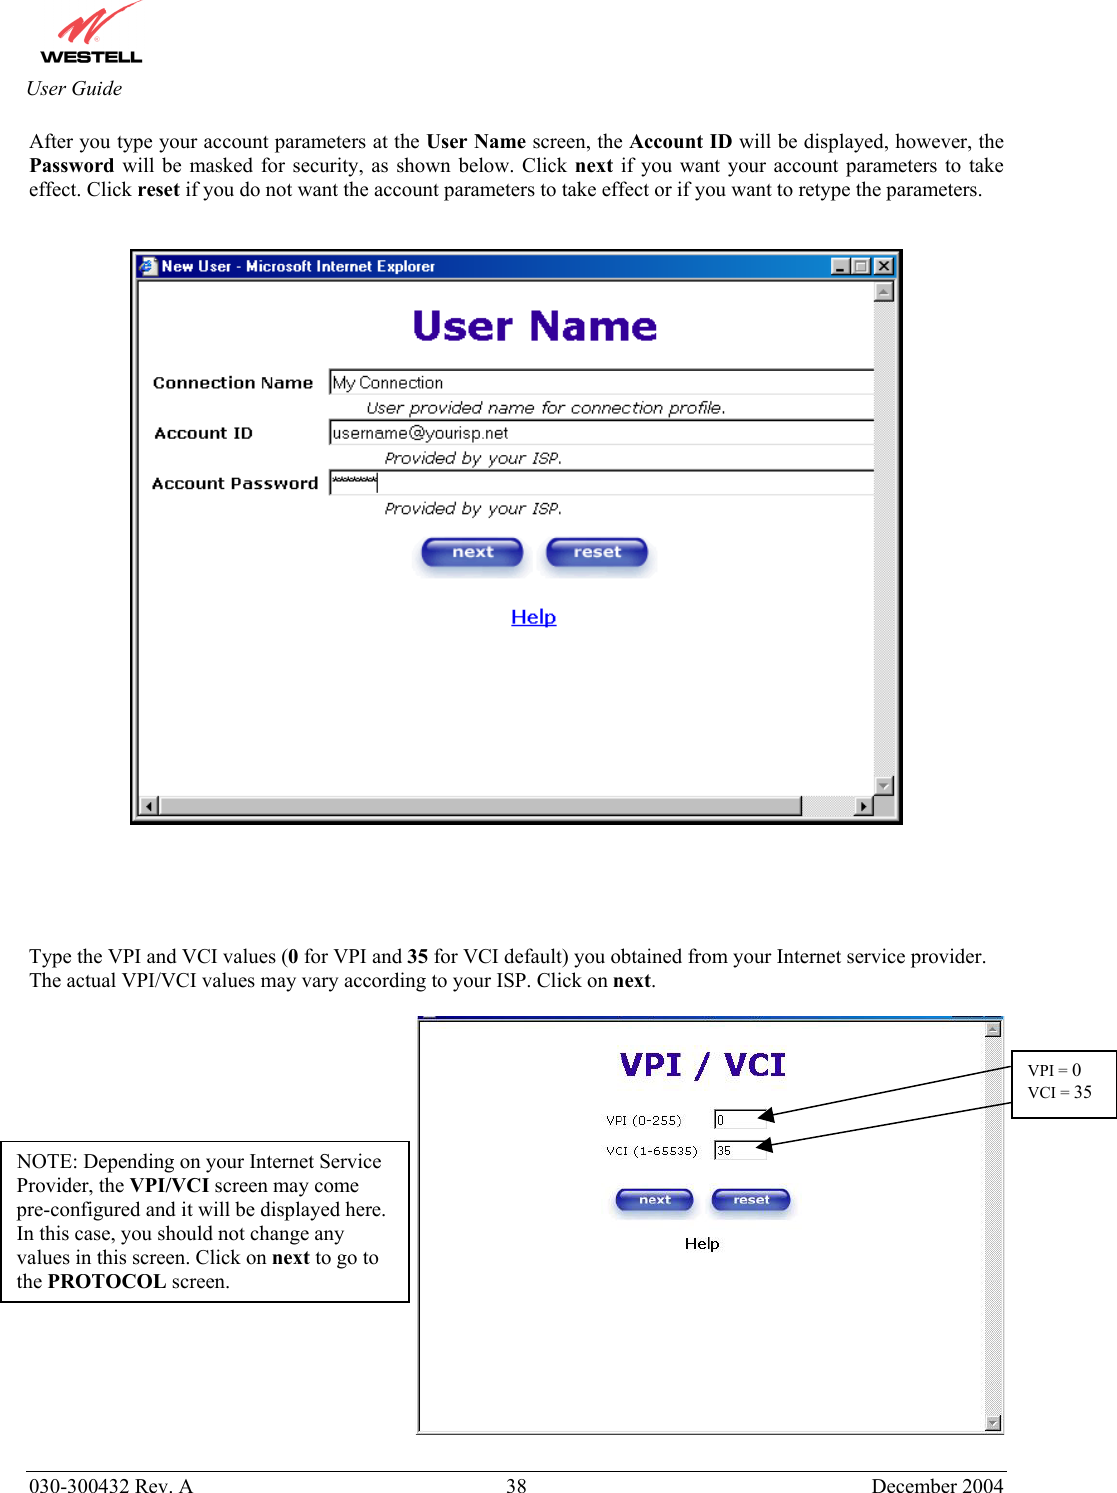       030-300432 Rev. A  38 December 2004  User Guide After you type your account parameters at the User Name screen, the Account ID will be displayed, however, the Password will be masked for security, as shown below. Click next if you want your account parameters to take effect. Click reset if you do not want the account parameters to take effect or if you want to retype the parameters.         Type the VPI and VCI values (0 for VPI and 35 for VCI default) you obtained from your Internet service provider. The actual VPI/VCI values may vary according to your ISP. Click on next.          NOTE: Depending on your Internet Service Provider, the VPI/VCI screen may come pre-configured and it will be displayed here. In this case, you should not change any values in this screen. Click on next to go to the PROTOCOL screen. VPI = 0 VCI = 35